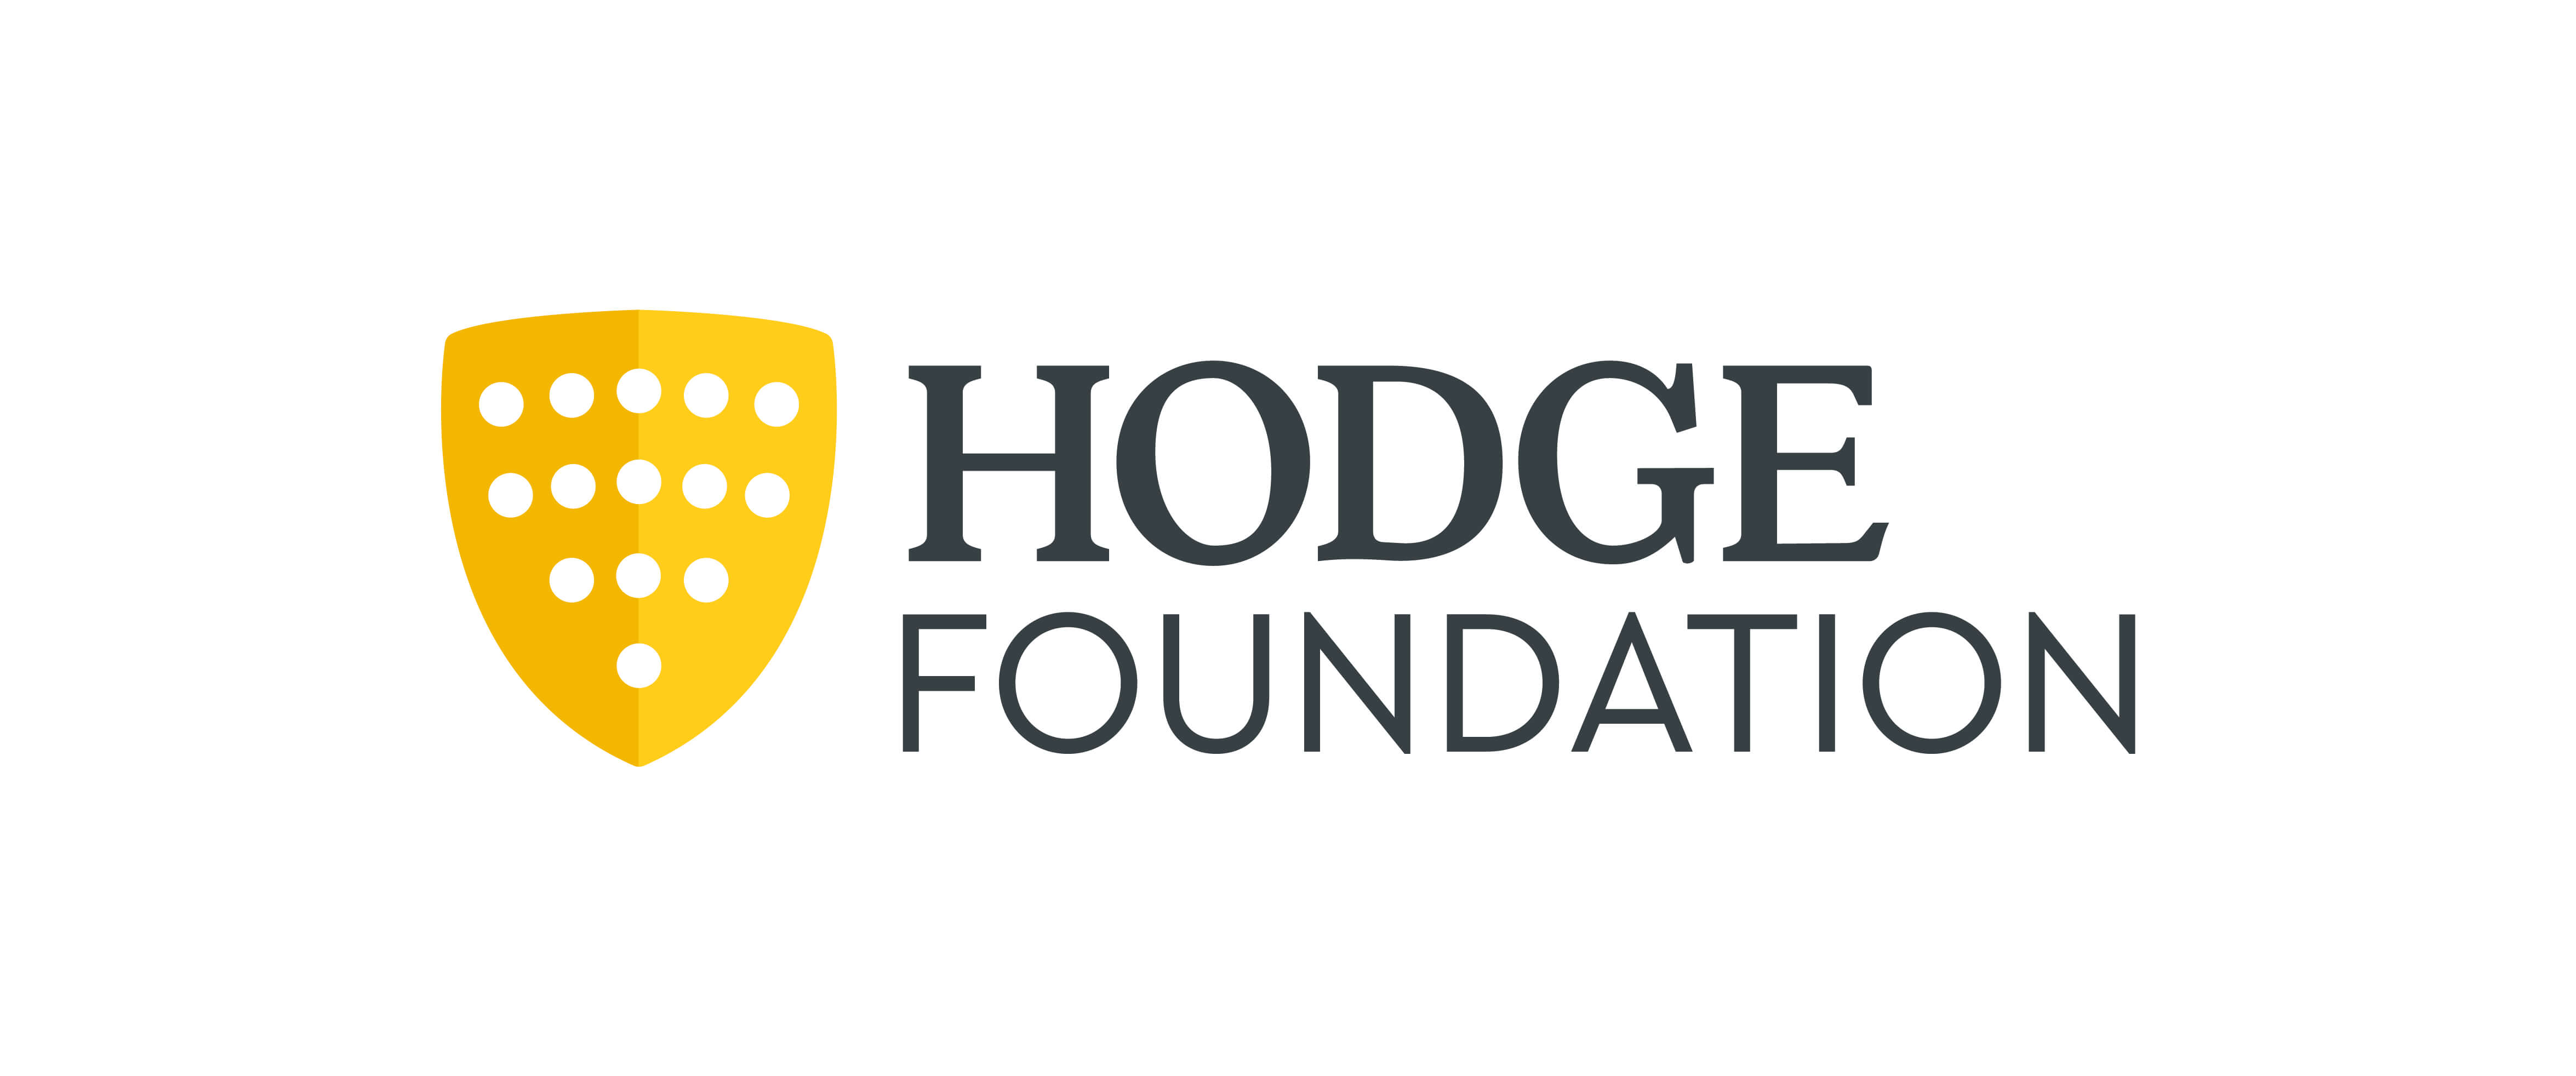 The Hodge Foundation